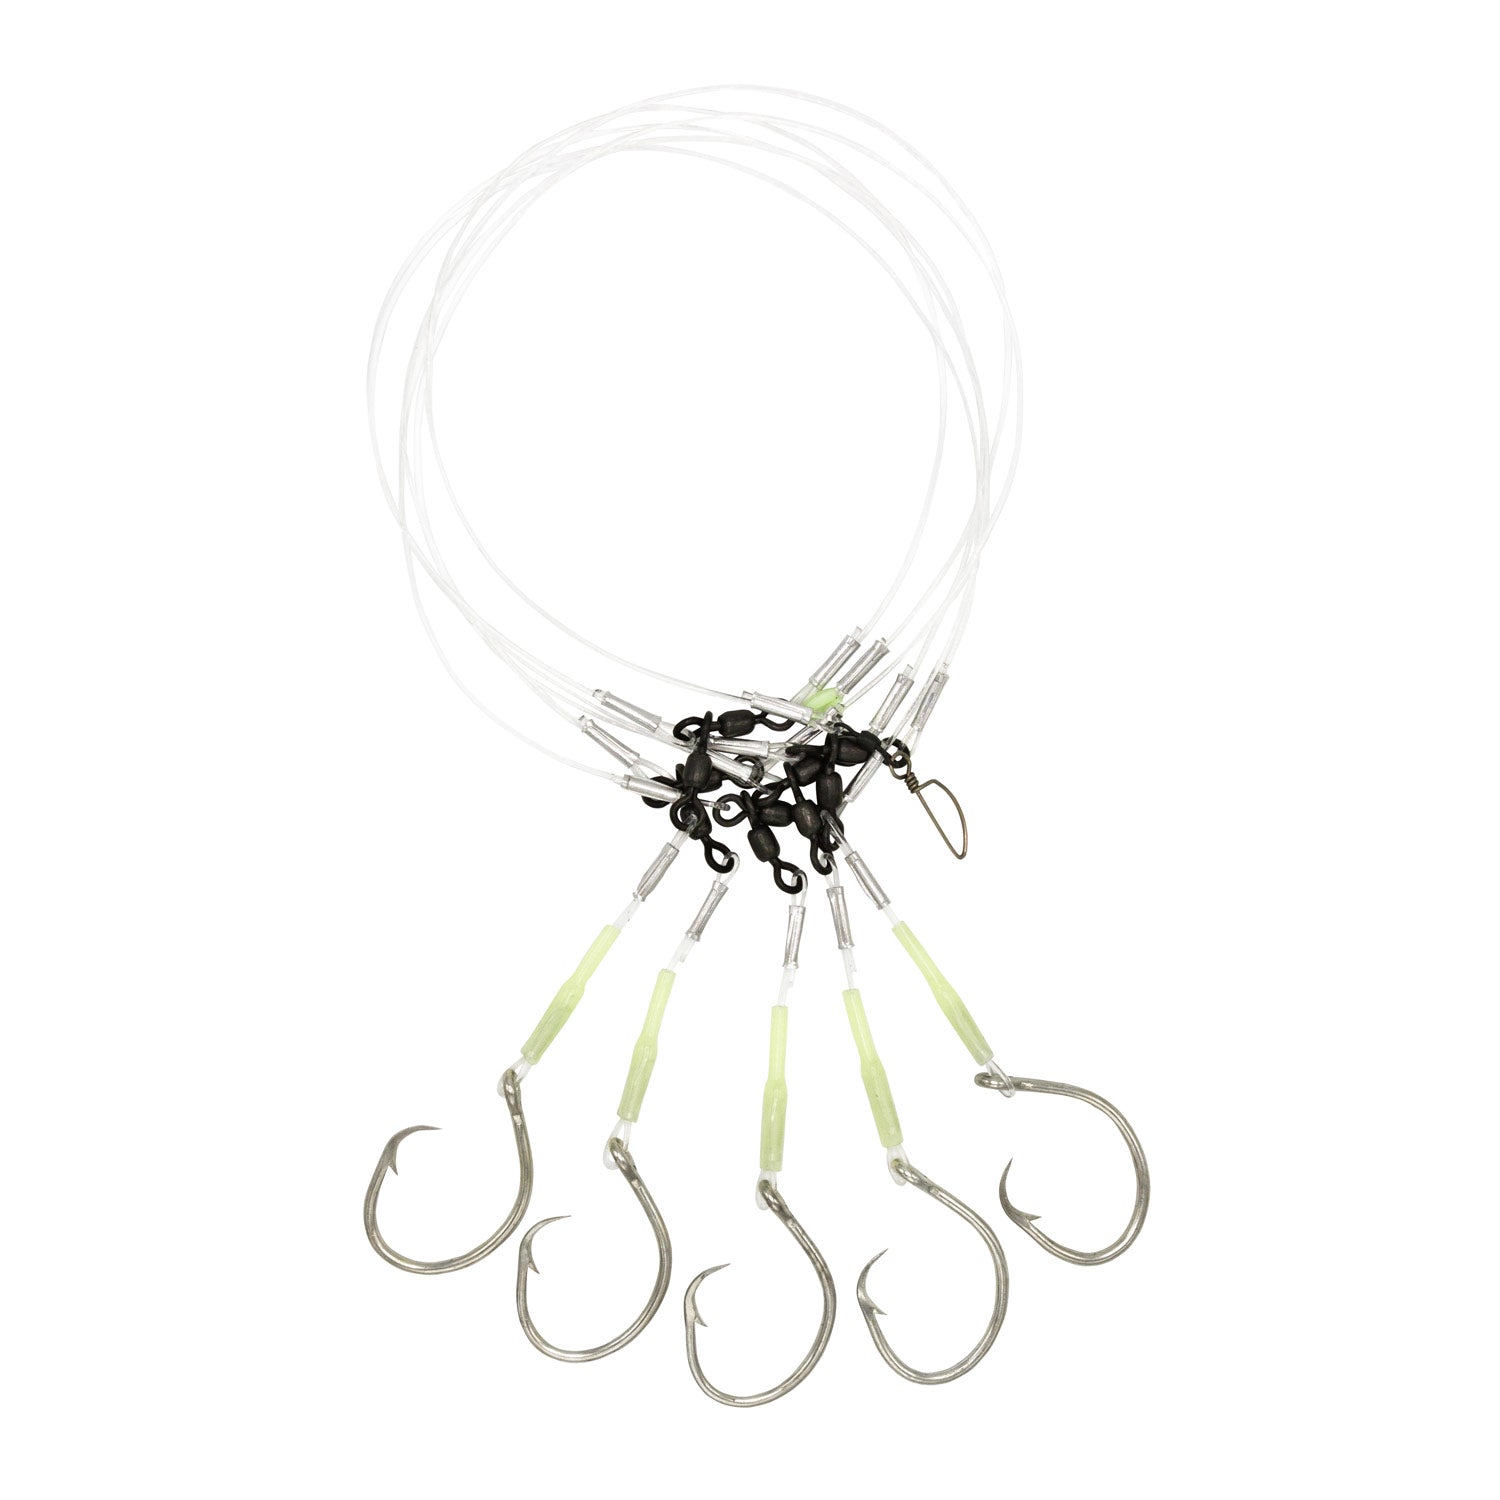 Deep Drop Snapper Rig with 6/0 Circle Hooks – End Game Tackle Company